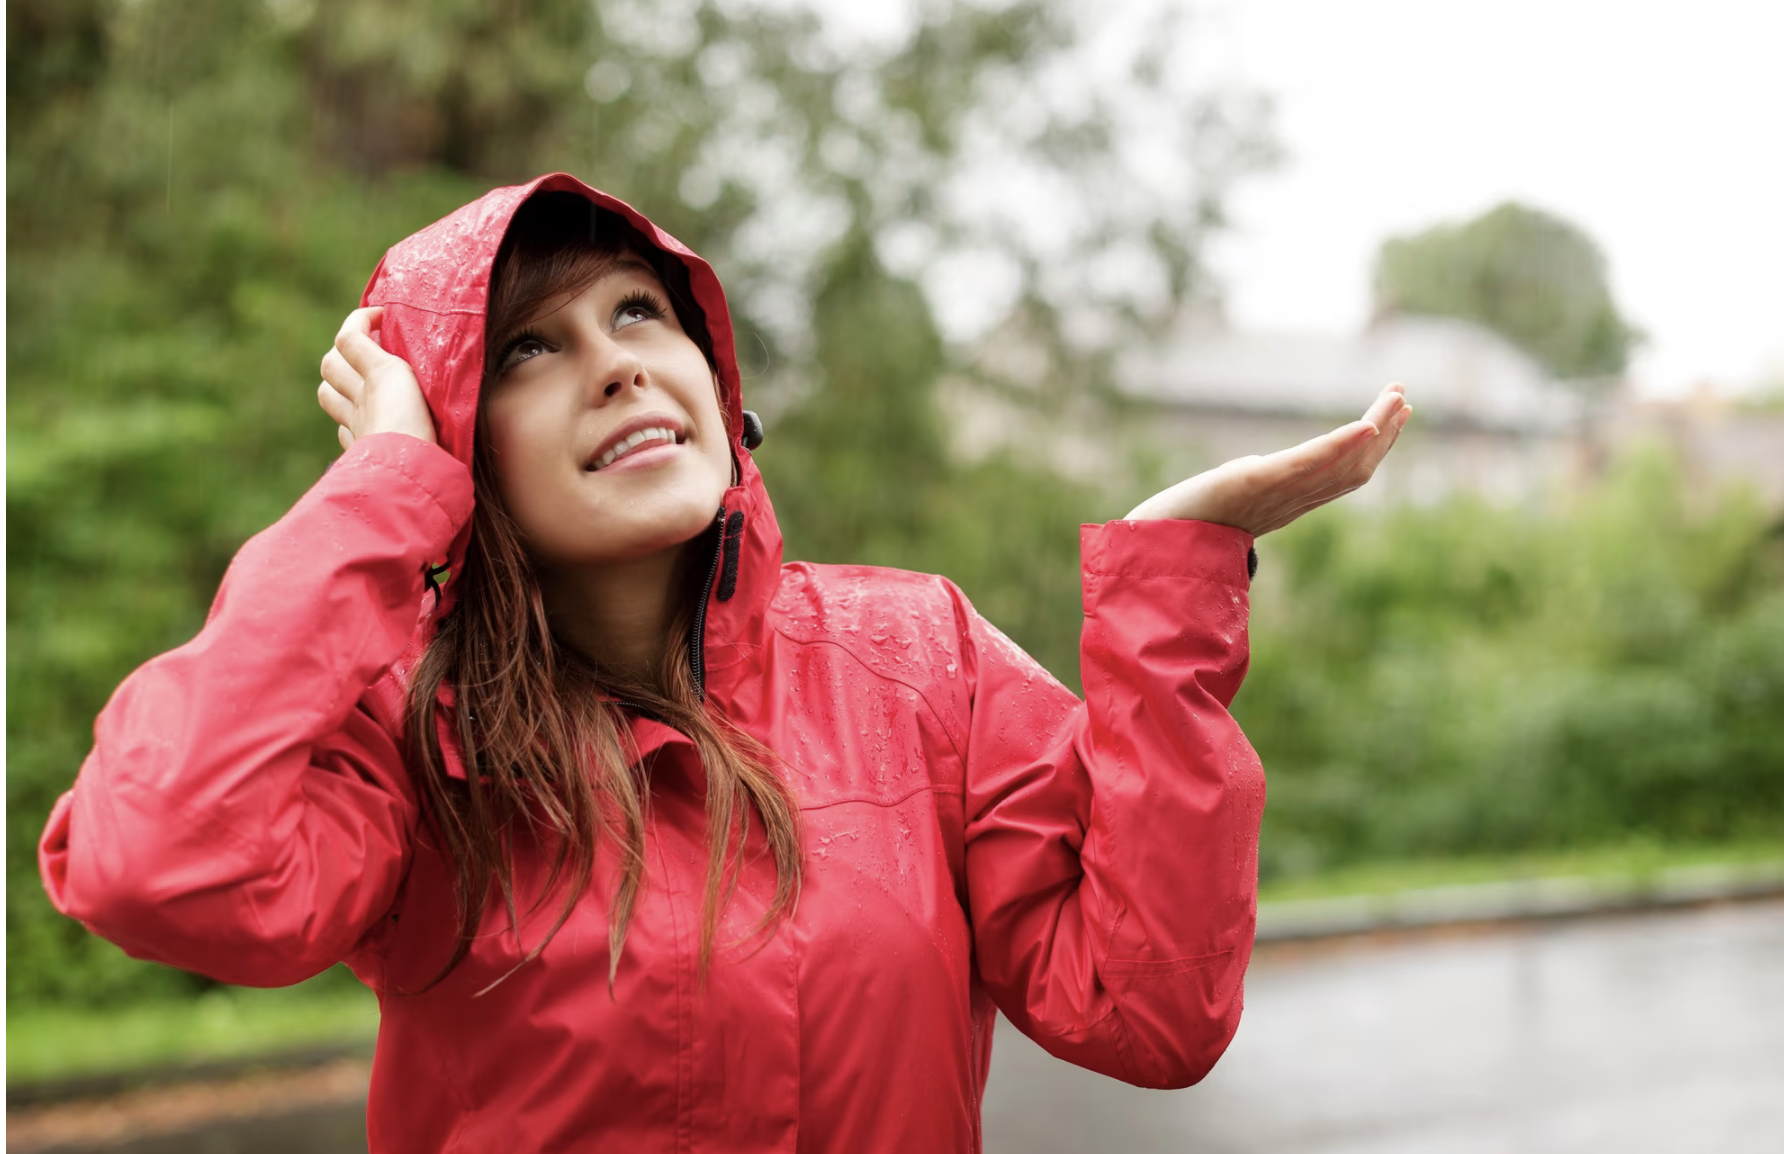 A woman in a red raincoat stands in the rain.